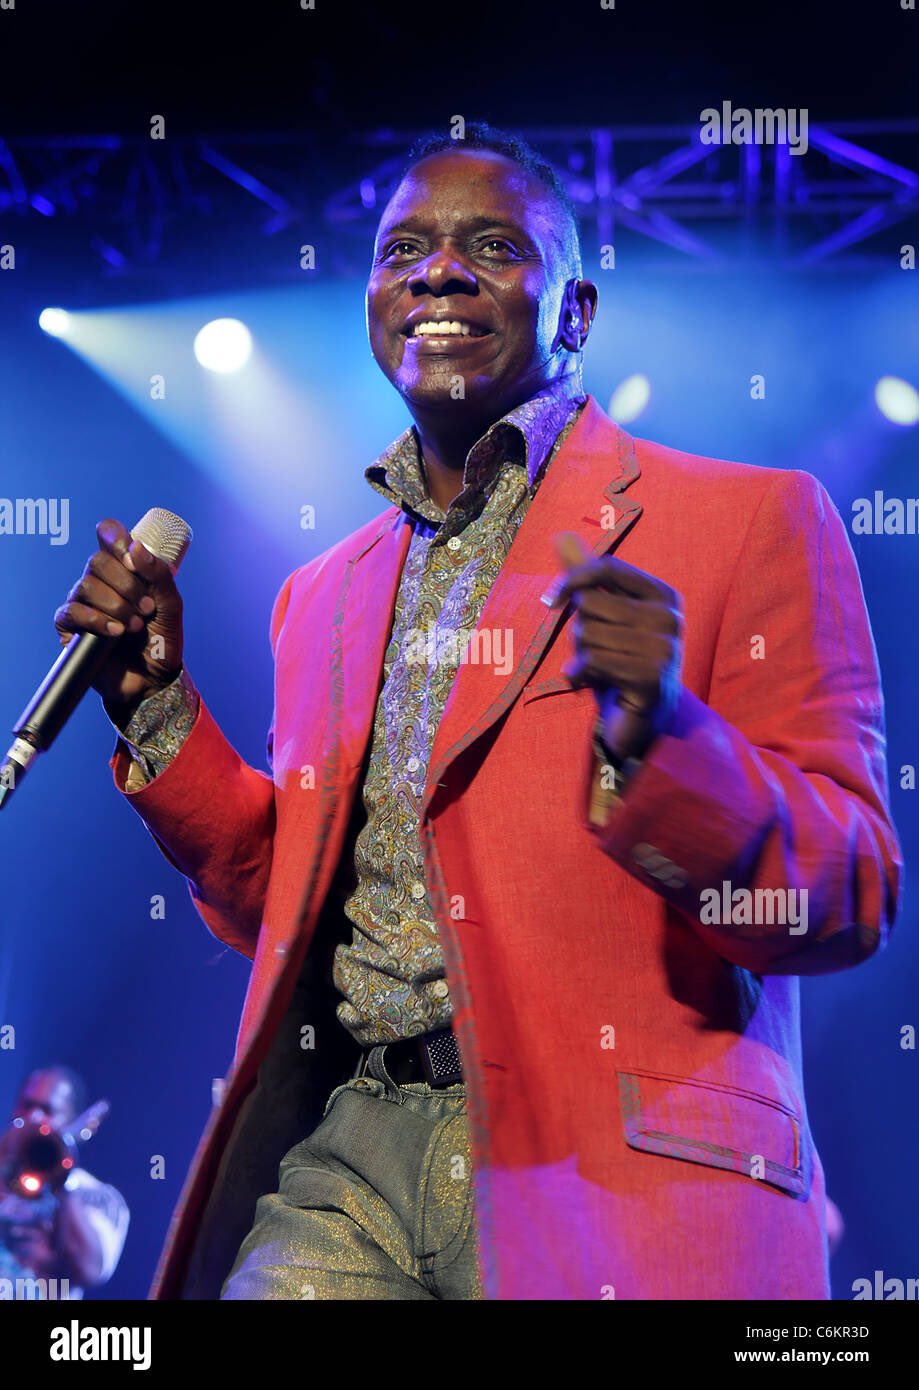 Happy Birthday to Philip Bailey ..Earth, Wind & Fire 